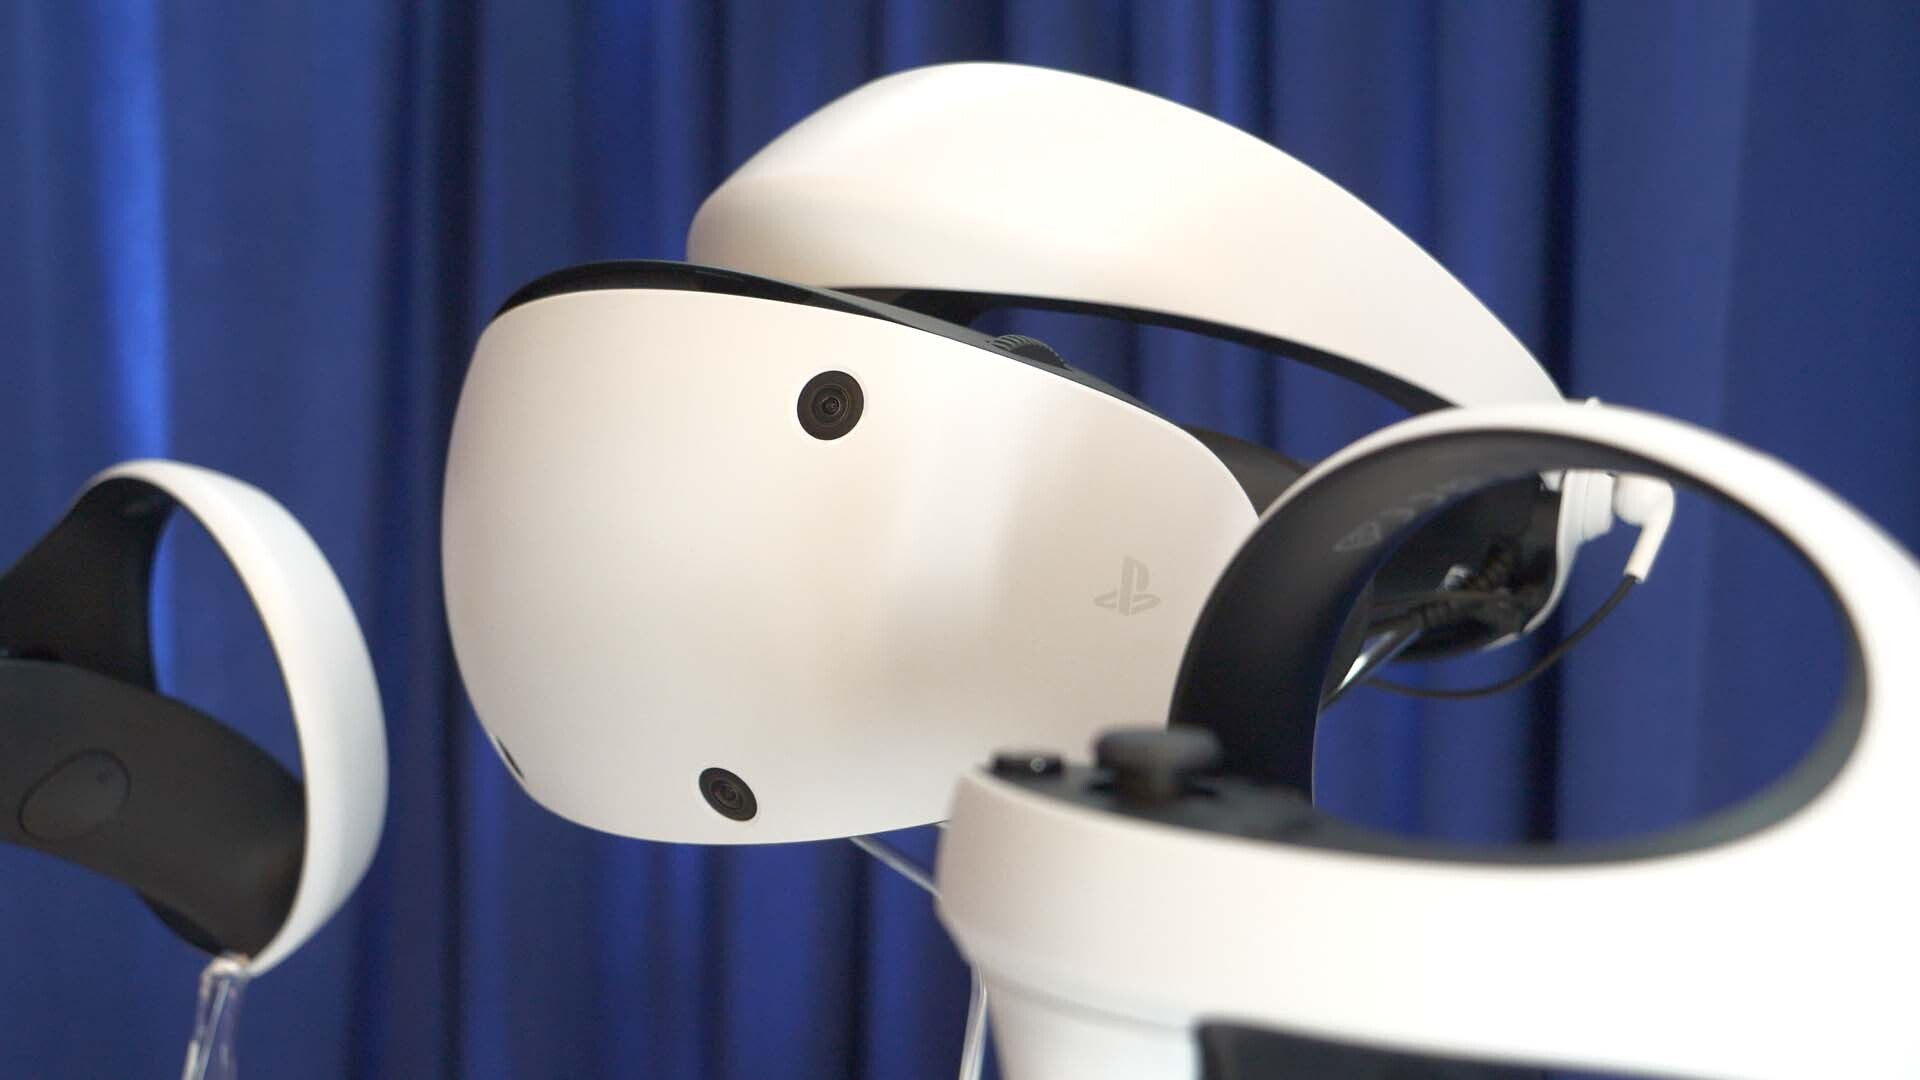 PlayStation VR2' Review: A strong foundation with a questionable future